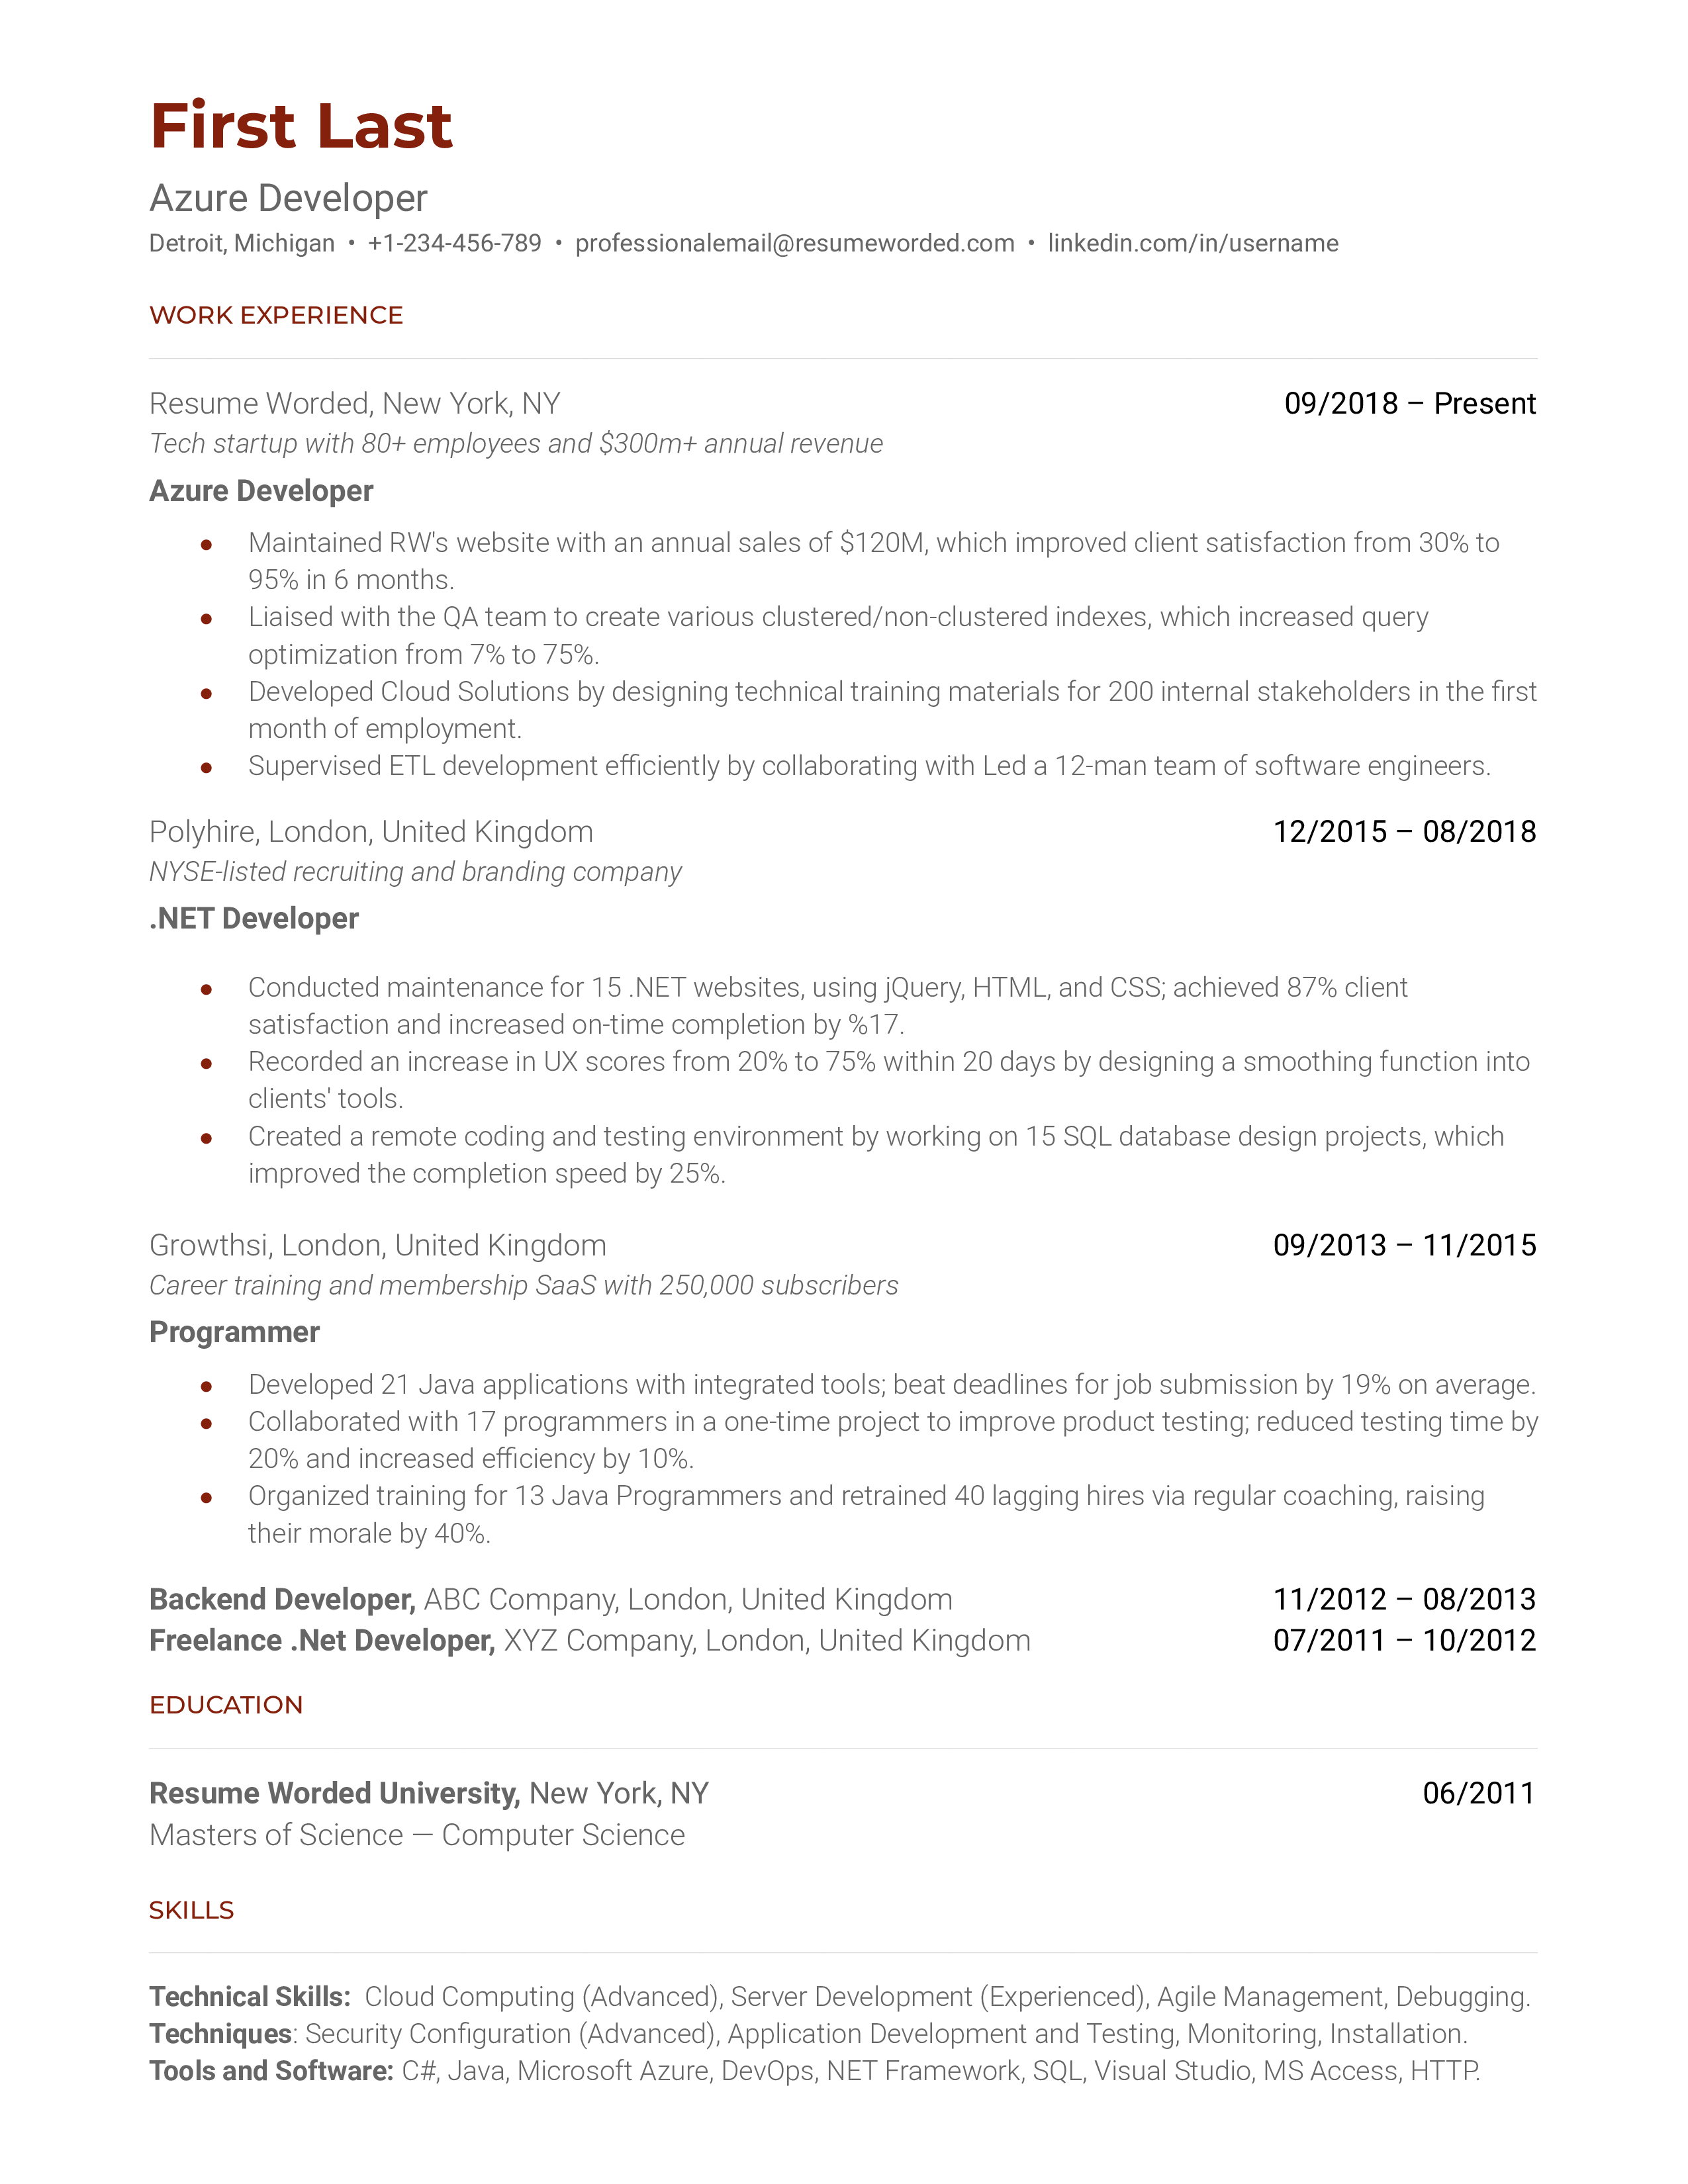 An Azure developer resume sample that highlights the applicant’s Azure qualifications and software development experience.